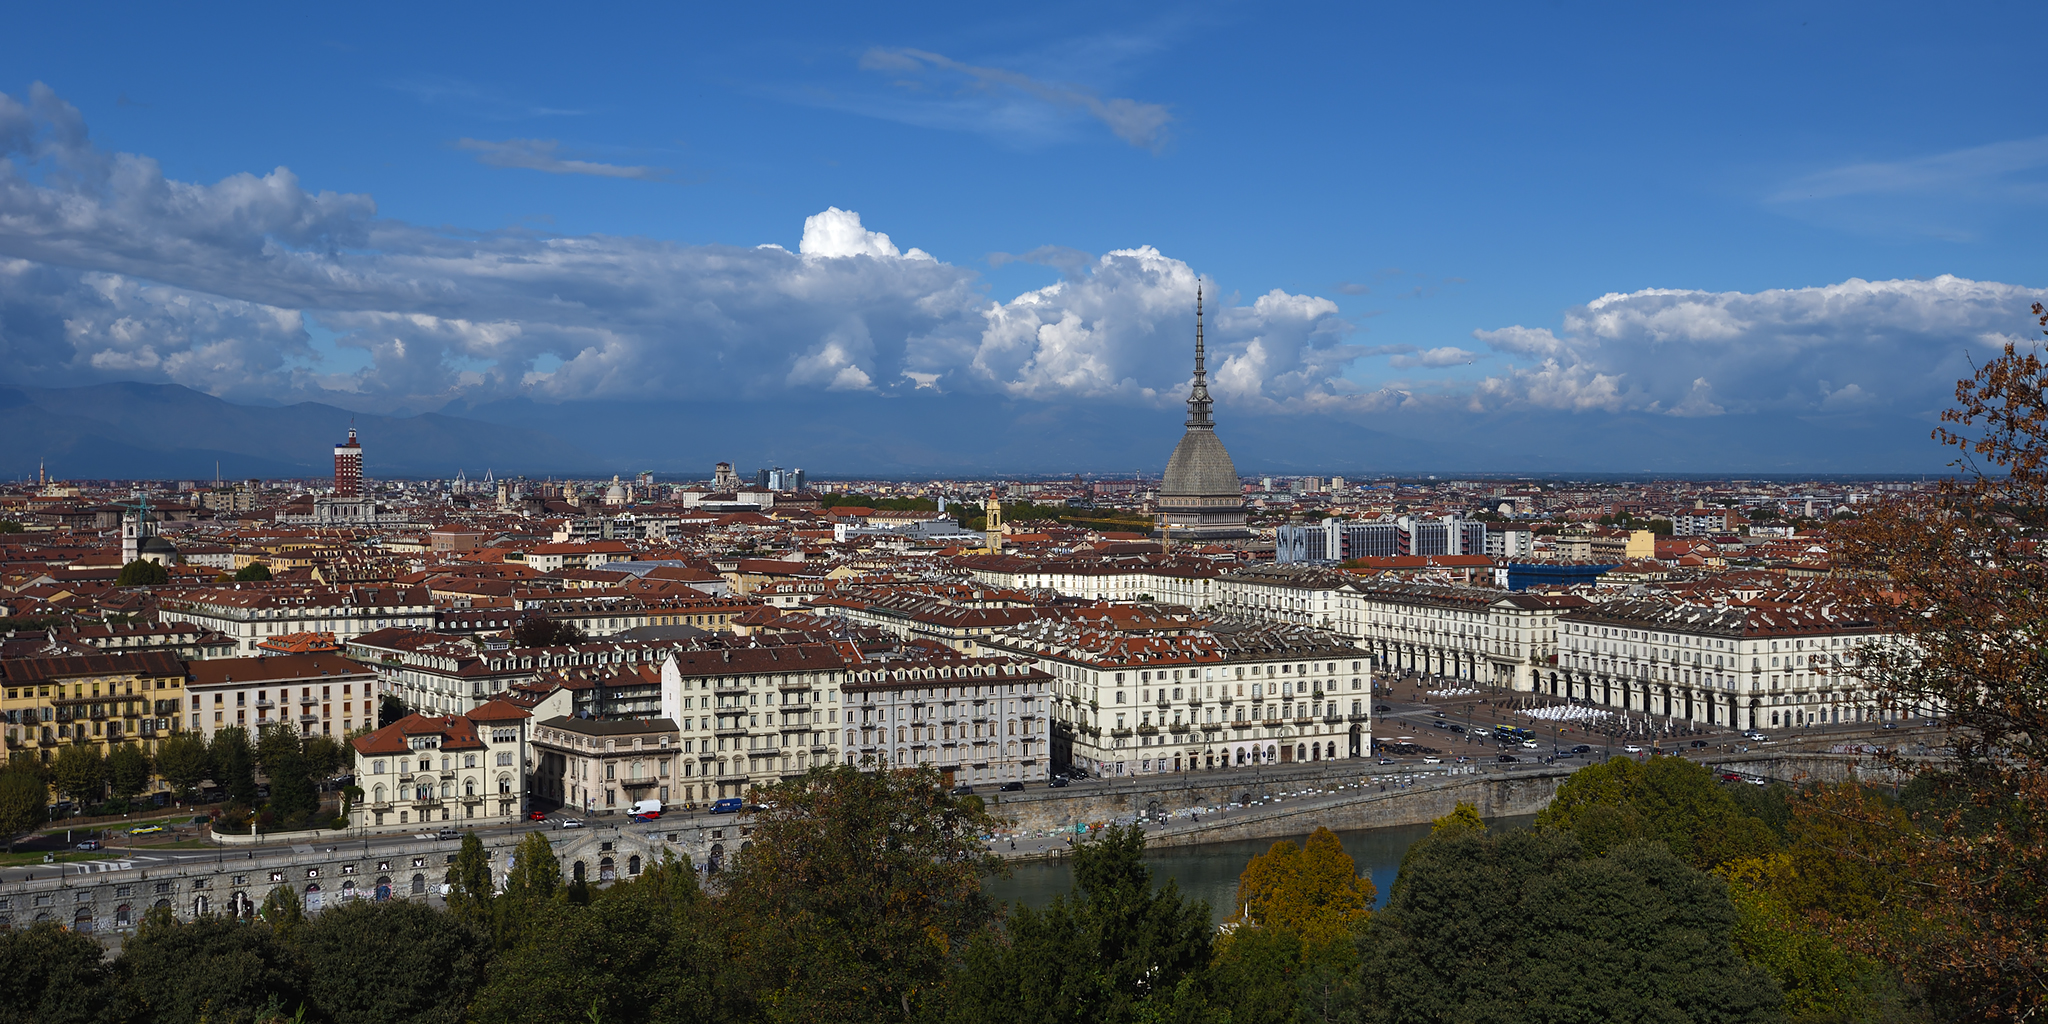 Postcard from Turin...